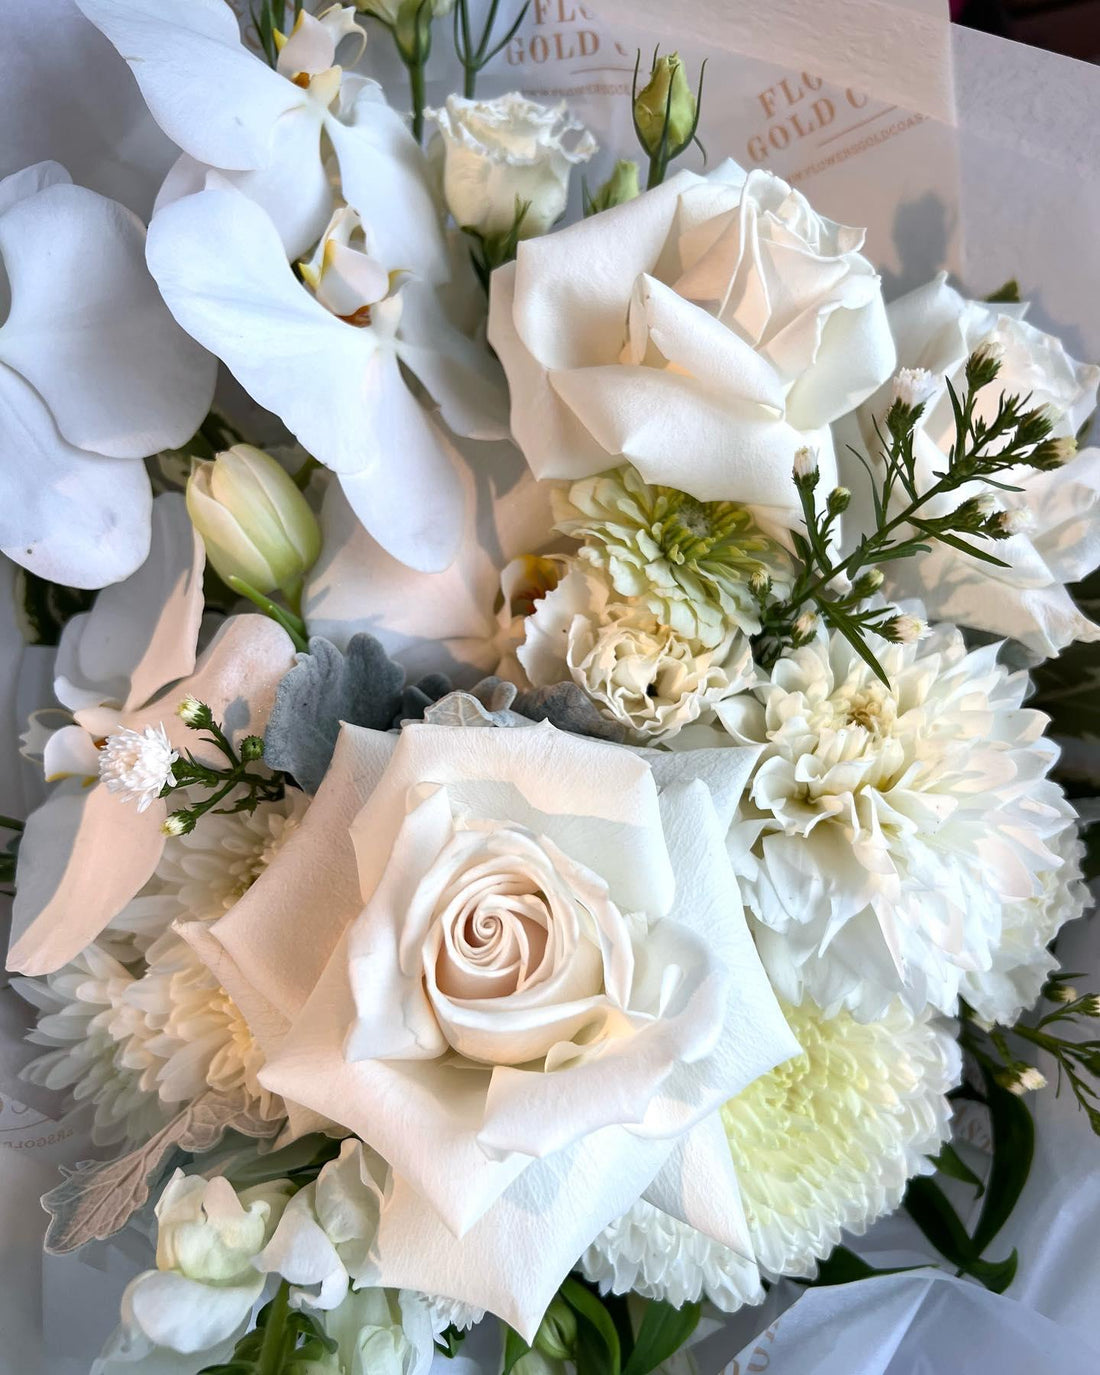 P O R C E L A I N E  W H I T E 

White and creams for this classic design 🤍

Why not add a luxuri made with love by Flowers Gold Coast www.flowersgoldcoast.com.au the Gold Coast's best Florist